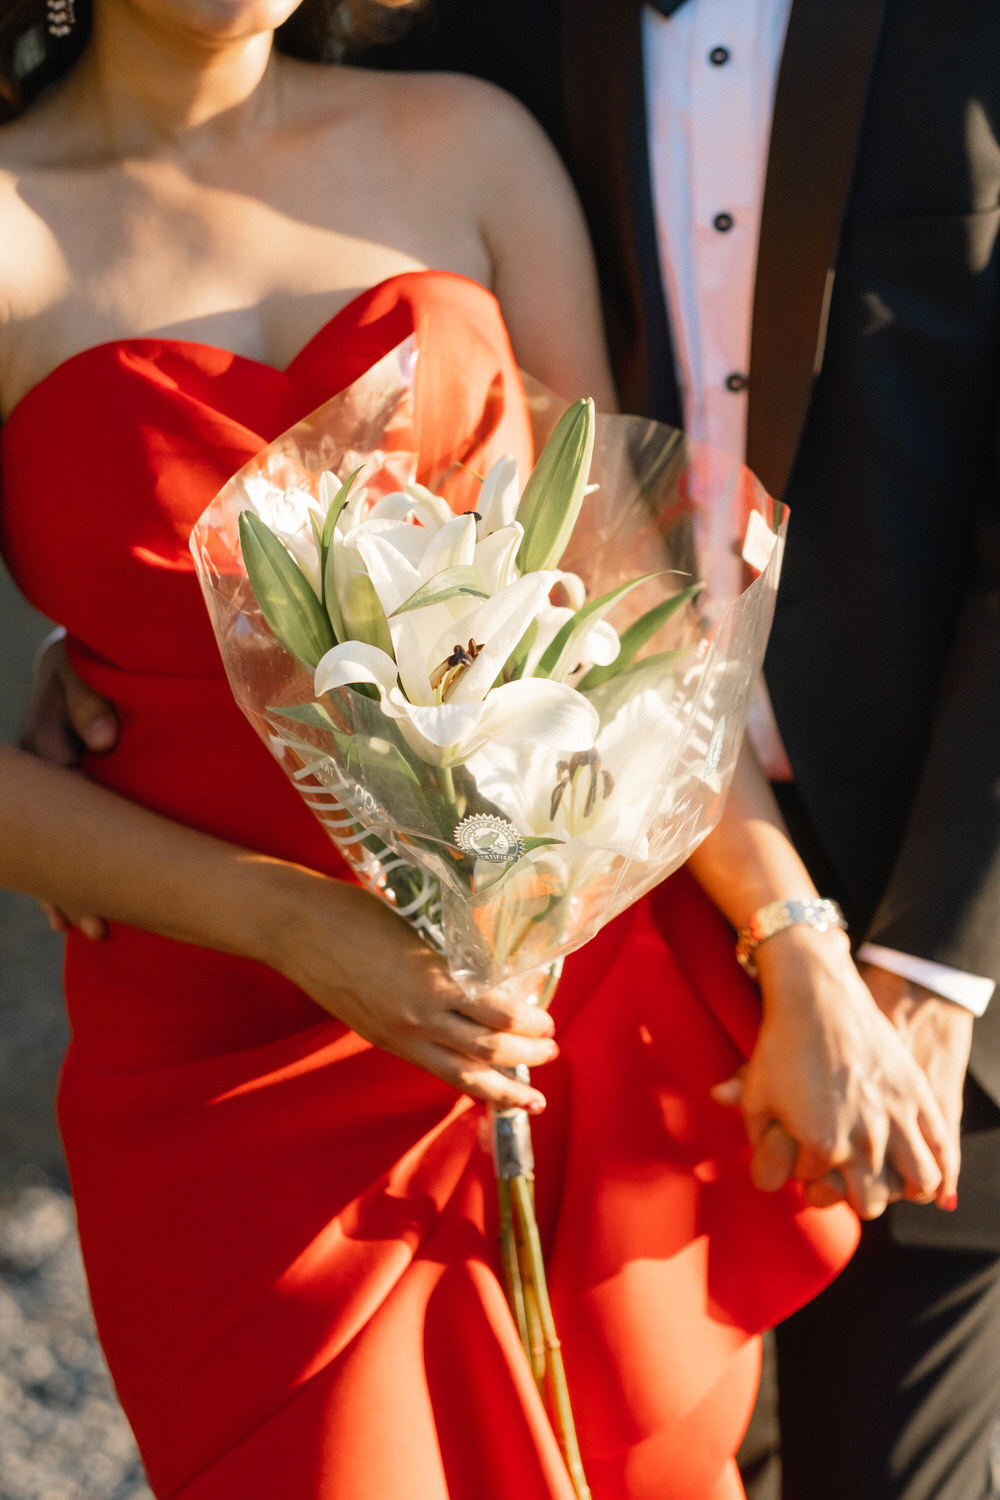 The bride and groom holdings hands while the bride grasps her bouquet